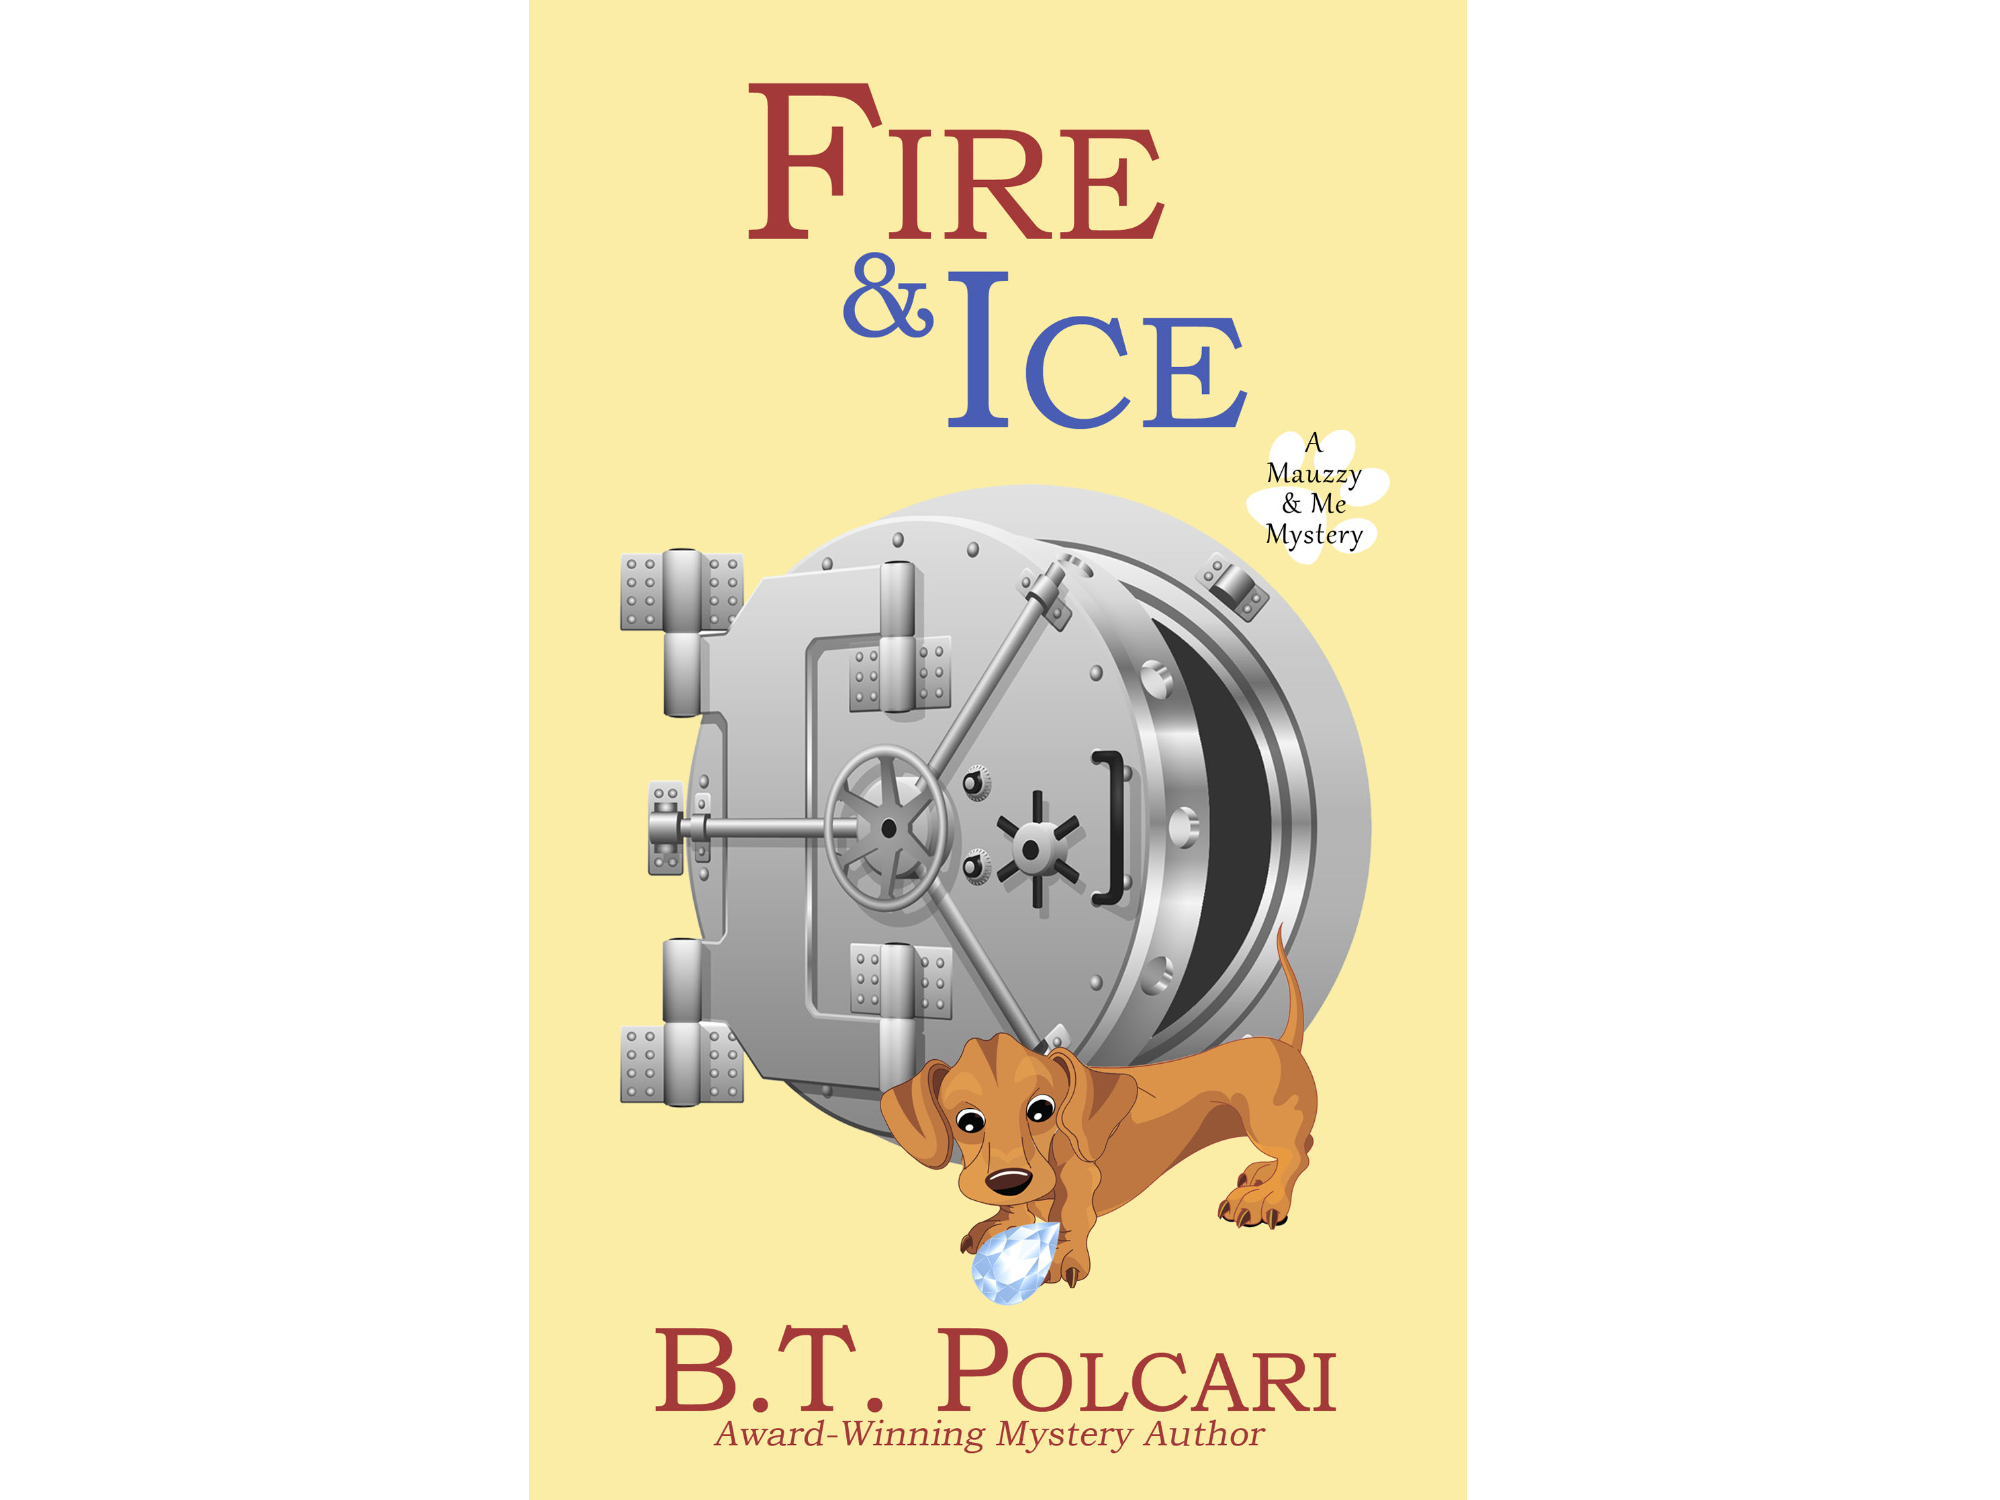 Chattanooga author B.T. Polcari launches second book in award-winning mystery series